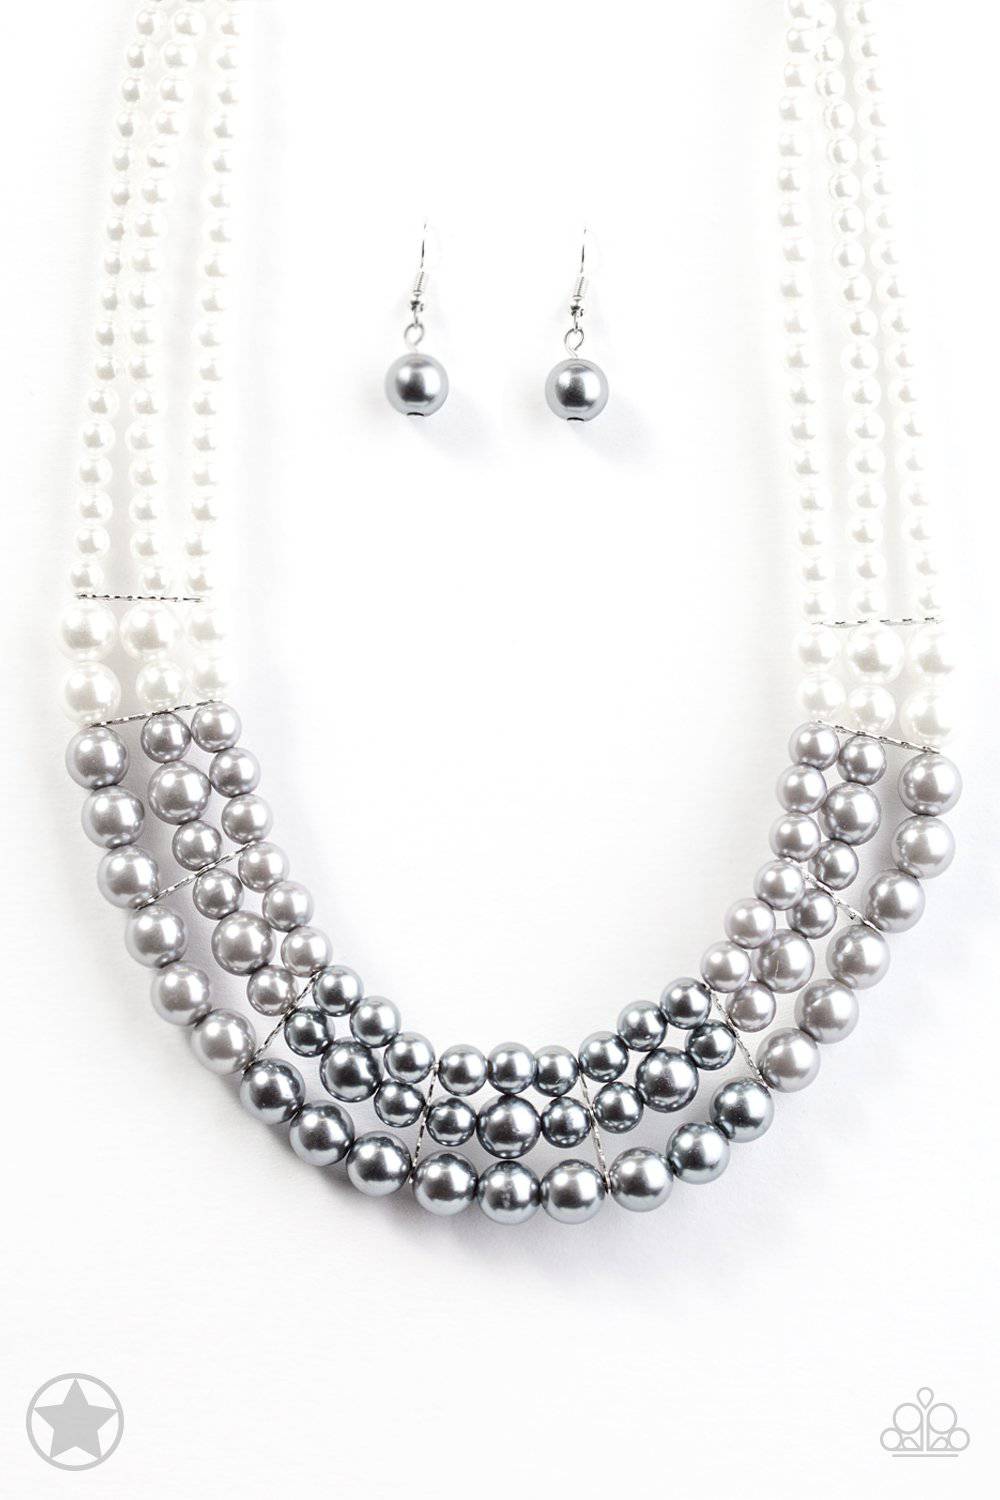 Lady In Waiting - White, Silver & Gray Pearl Blockbuster Necklace - Paparazzi Accessories - GlaMarous Titi Jewels